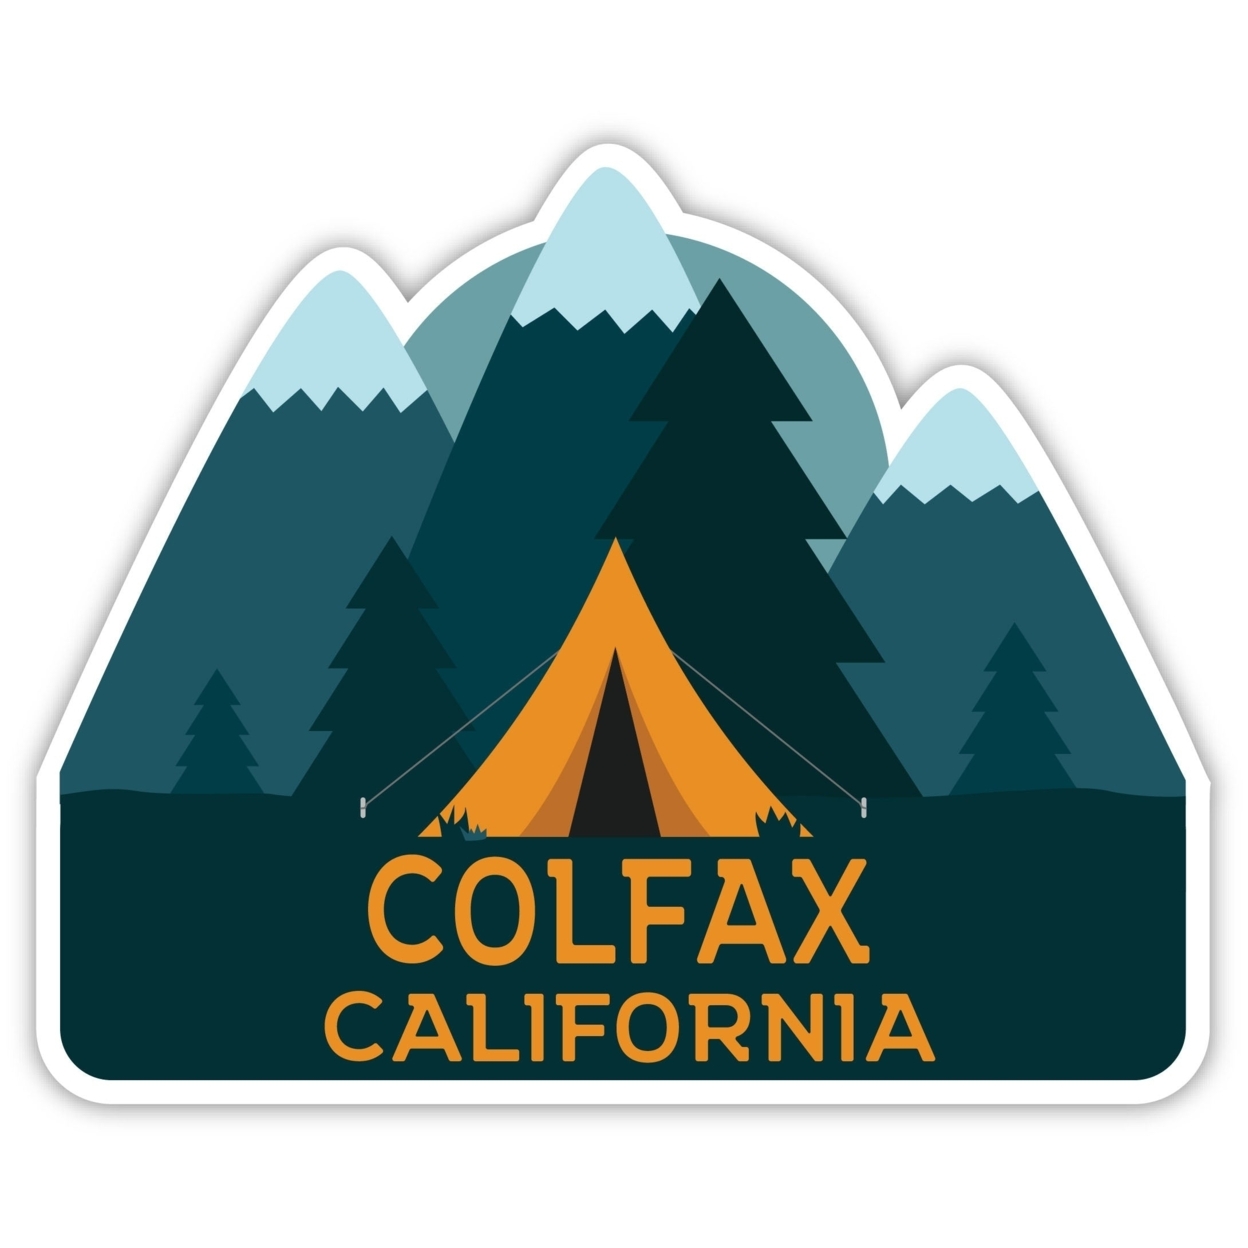 Colfax California Souvenir Decorative Stickers (Choose Theme And Size) - 4-Pack, 12-Inch, Tent